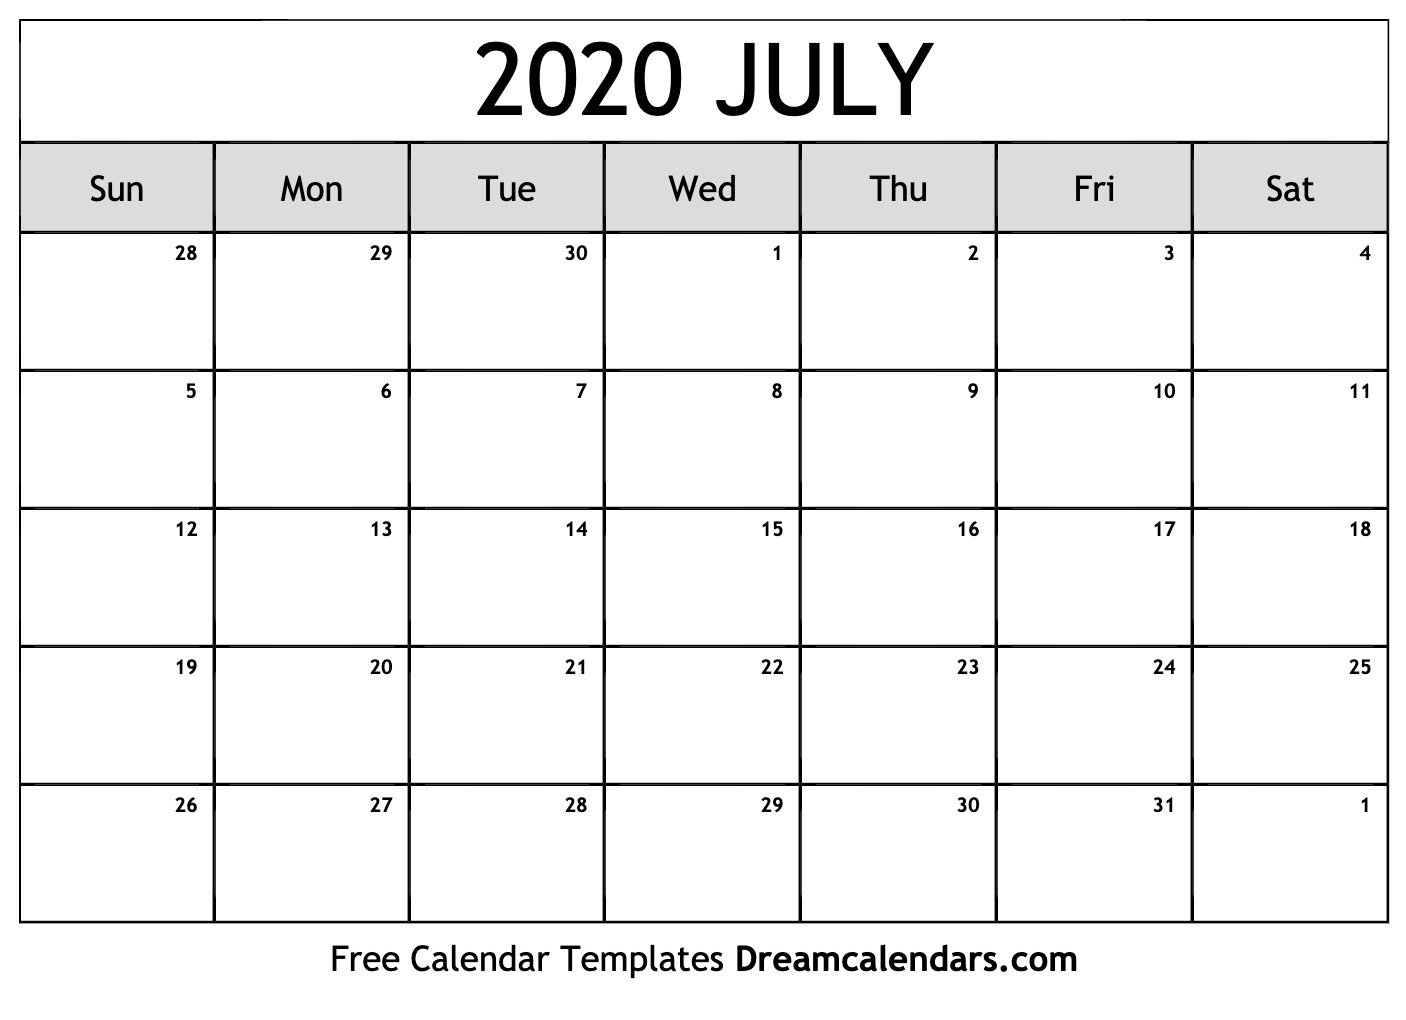 July 2020 Calendar - Free Printable With Holidays And Observances regarding Free Printable Calendar July 202